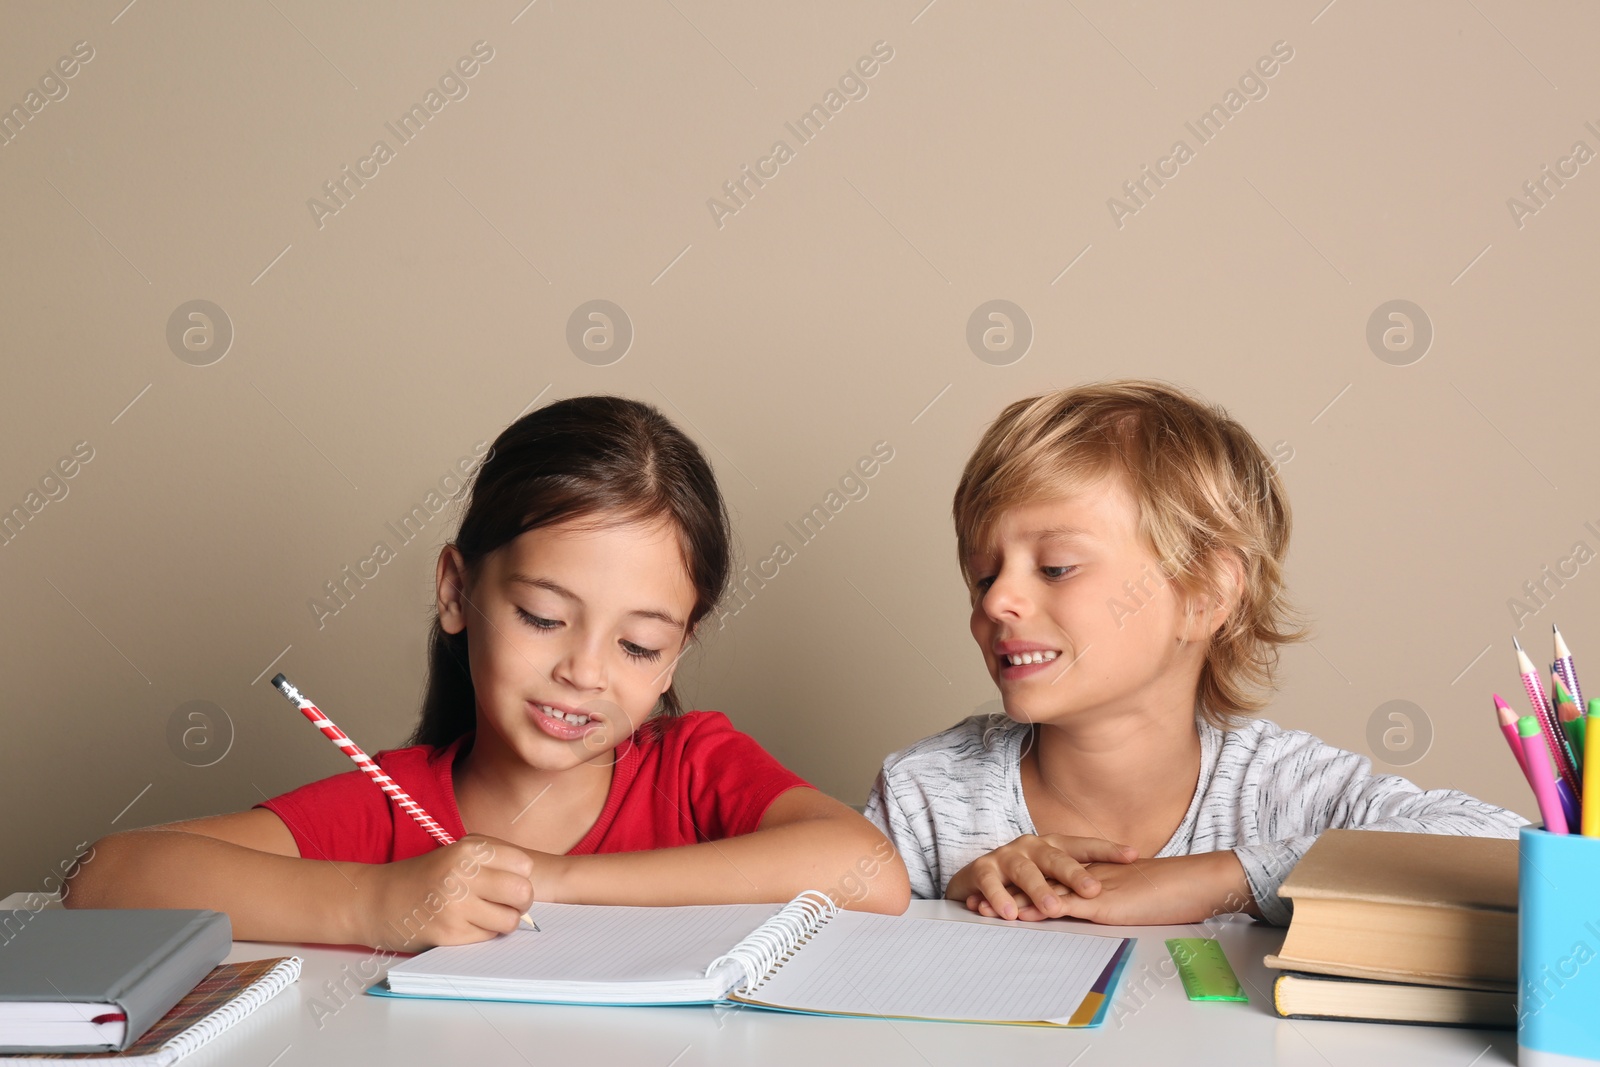 Photo of Little boy and girl doing homework at table on beige background